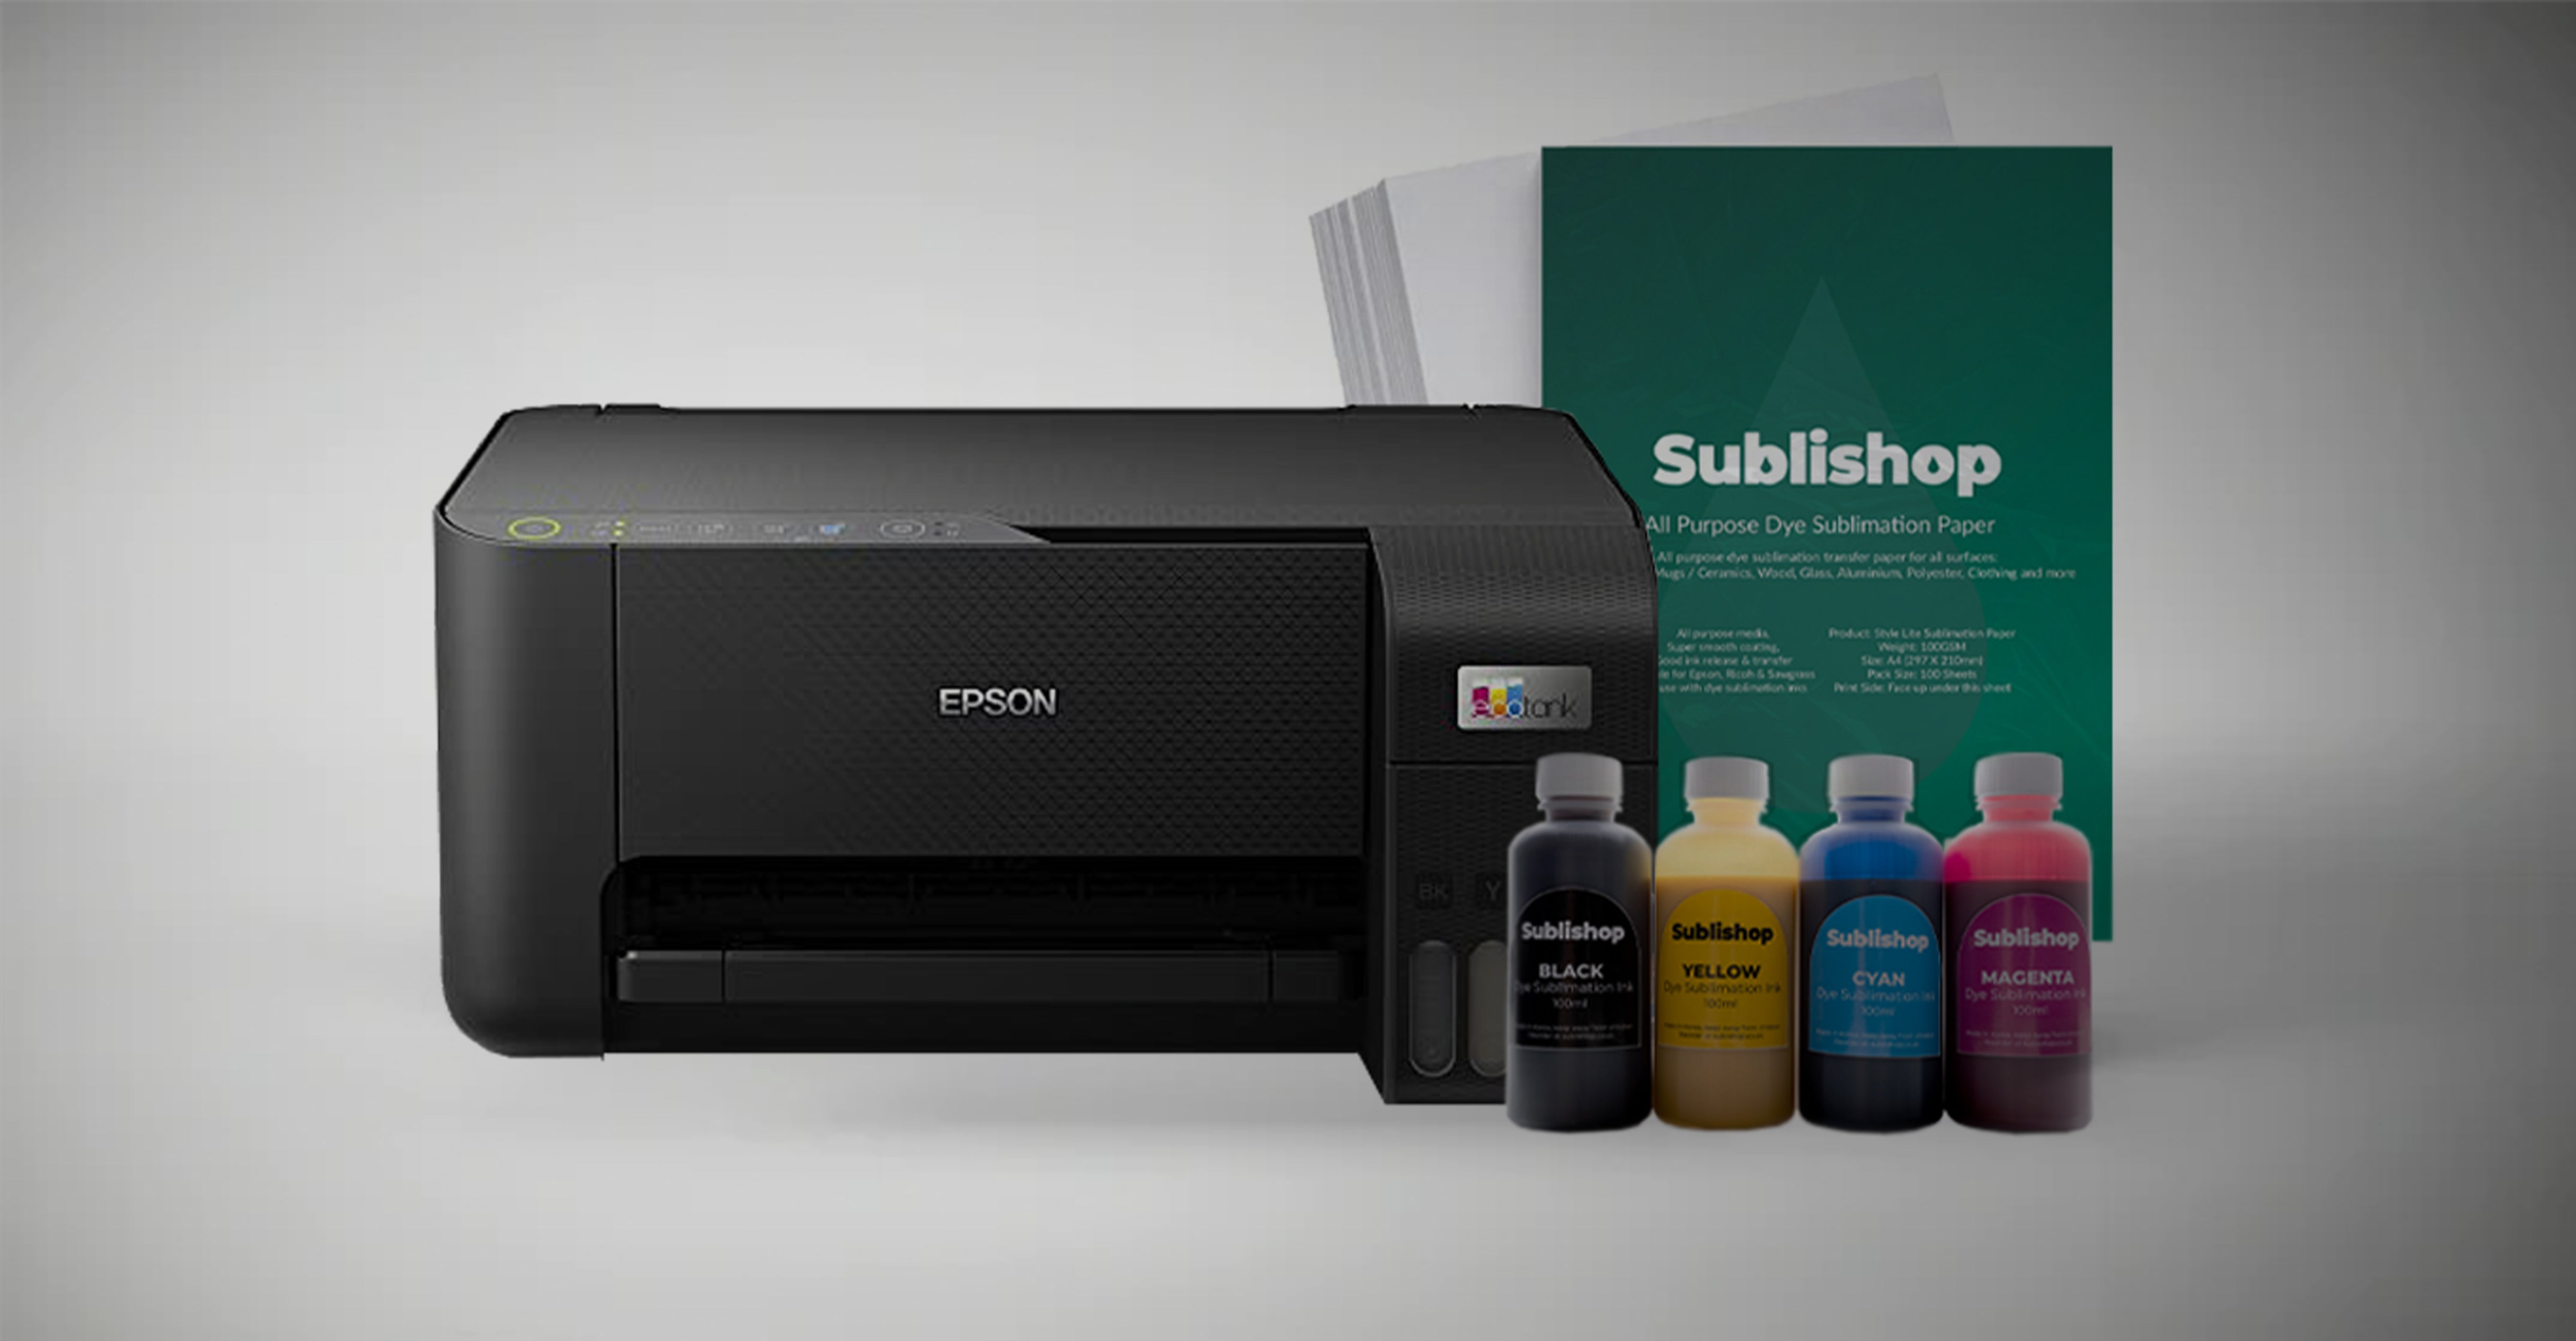 How To Turn A Epson Printer Into A Sublimation Printer - Sublishop